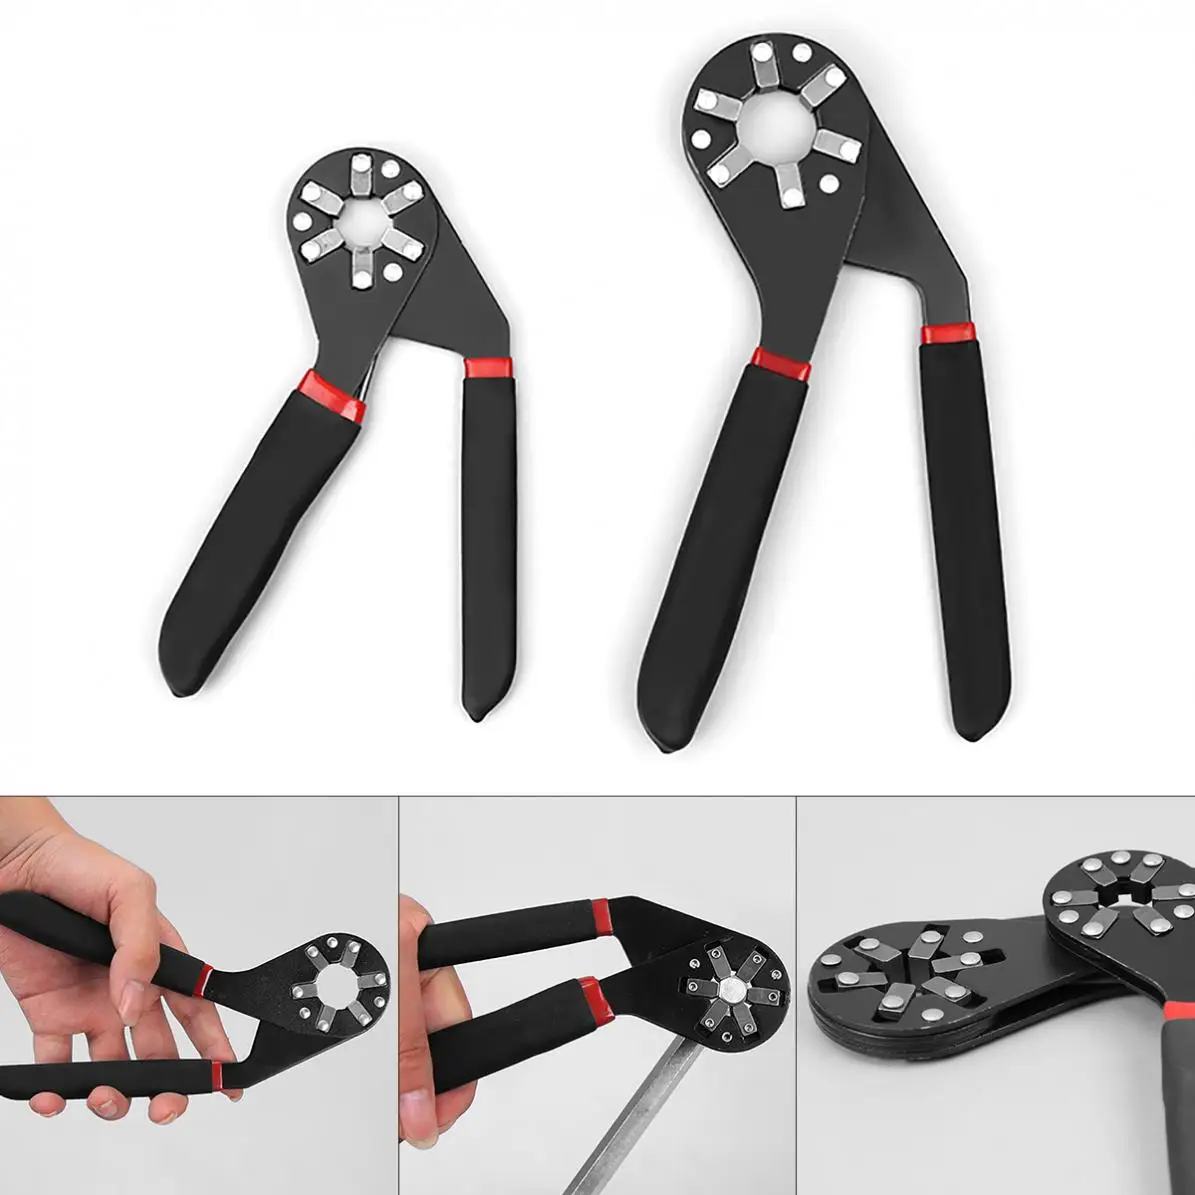 

6In/8In Torque Adjustable Spanner Tool Mini Magic Multifunctional Outer Hexagonal Plum Blossom Wrench Home Tools